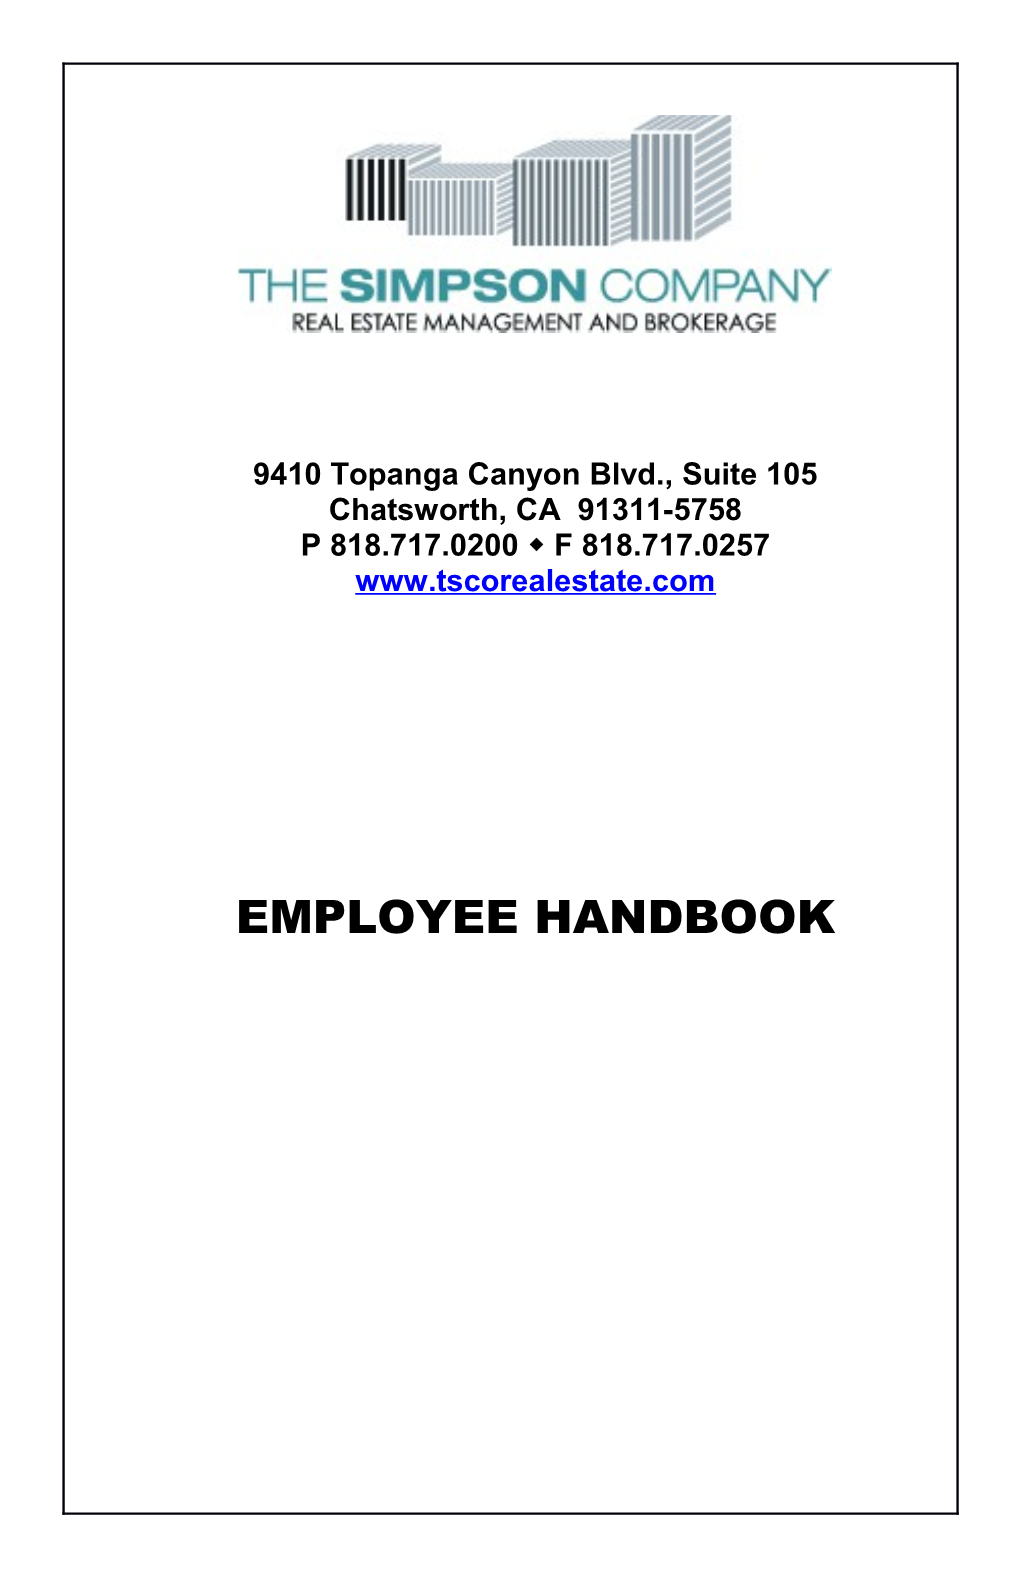 This Employee Handbook Has Been Tailored Expressly for Your Company by PAYCHEX, Inc